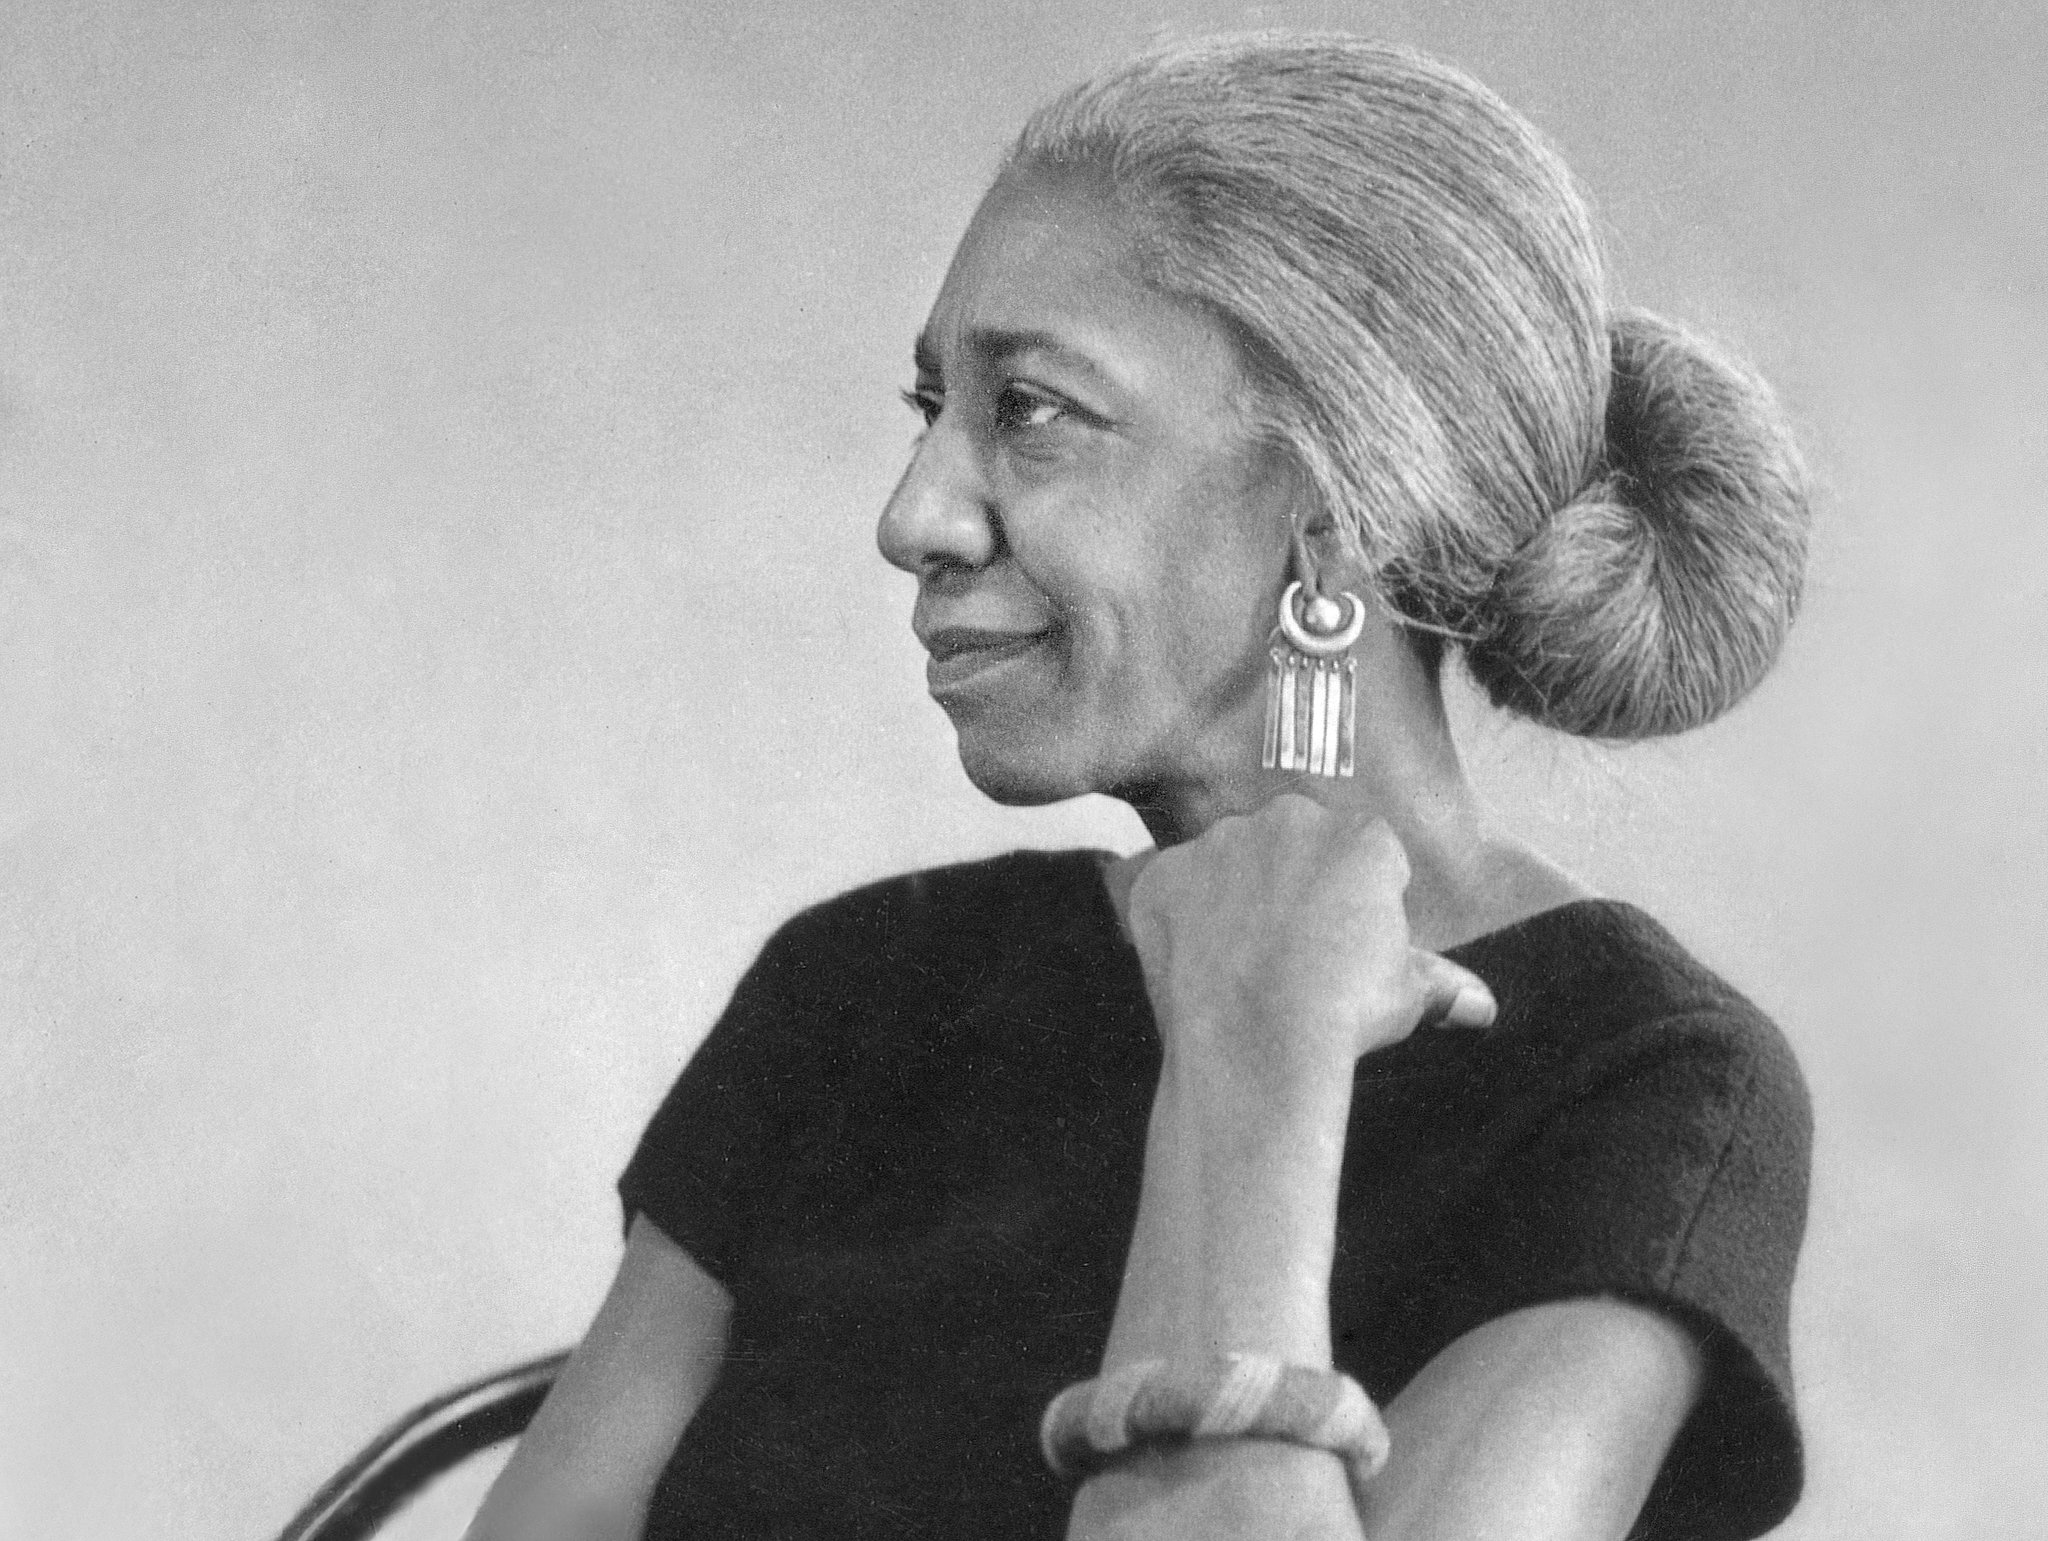 A black and white bust photo of Edna Lewis. She is sitting on a chair facing the left side of the photo. Her hand rests on her collar bone and she is wearing a black shirt, a bangle on her arm, and intricately designed earrings. Her hair is pulled back into a low bun.